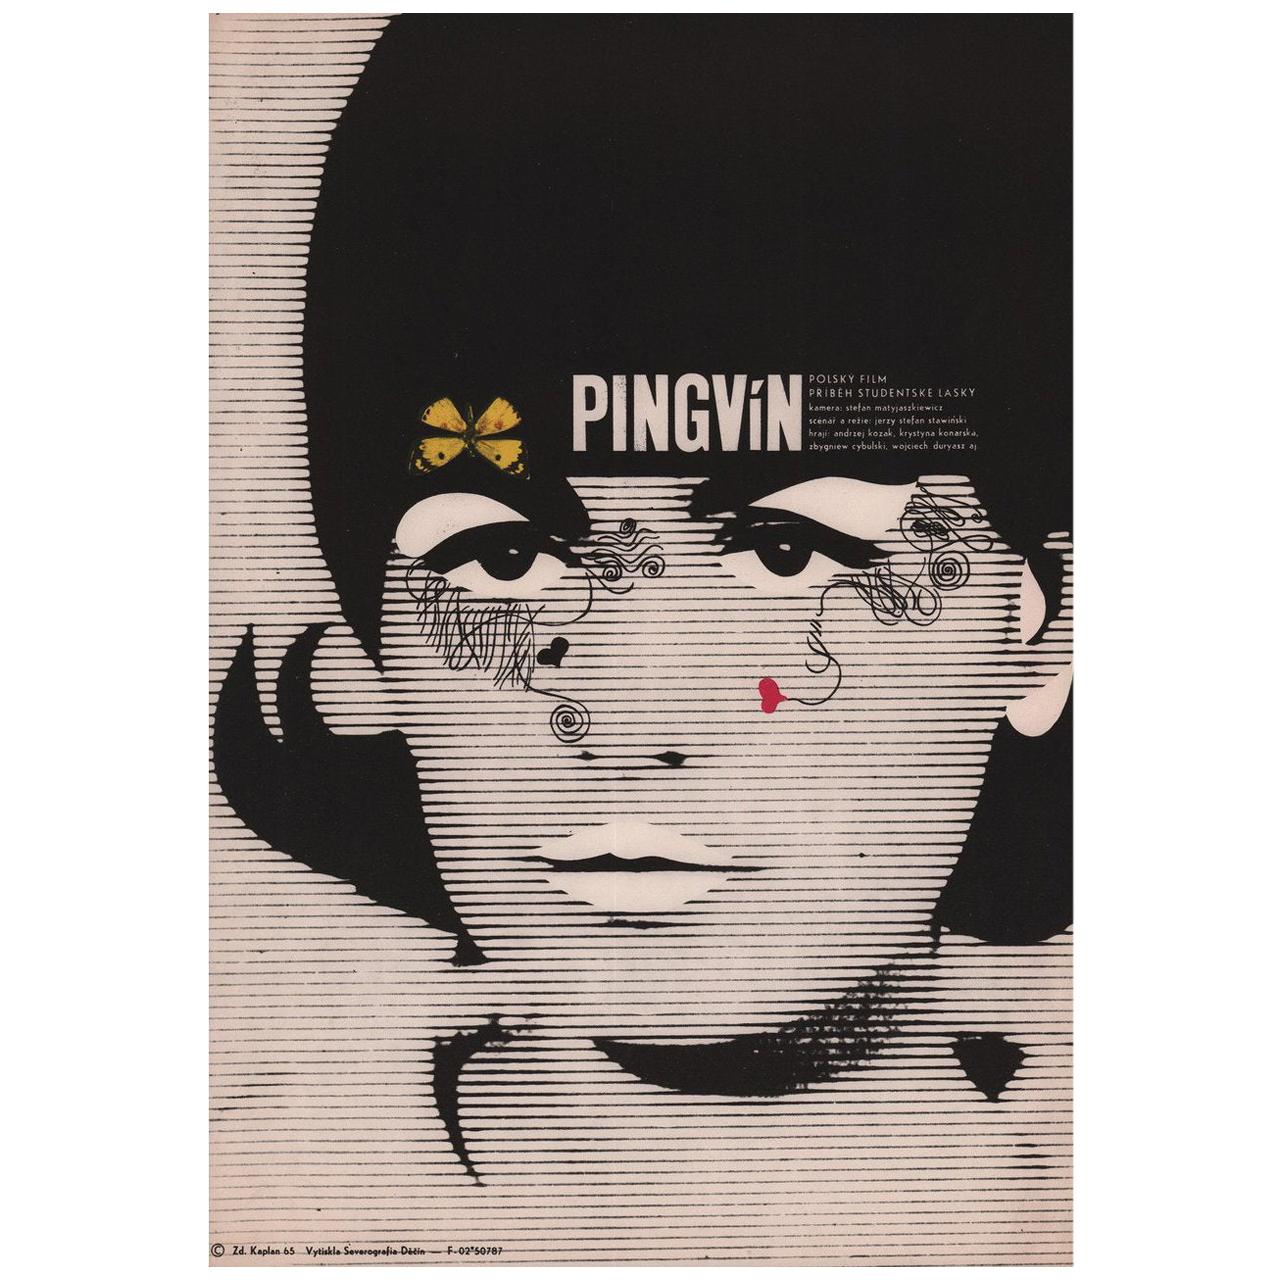 Pingwin 1965 Czech A3 Film Poster For Sale